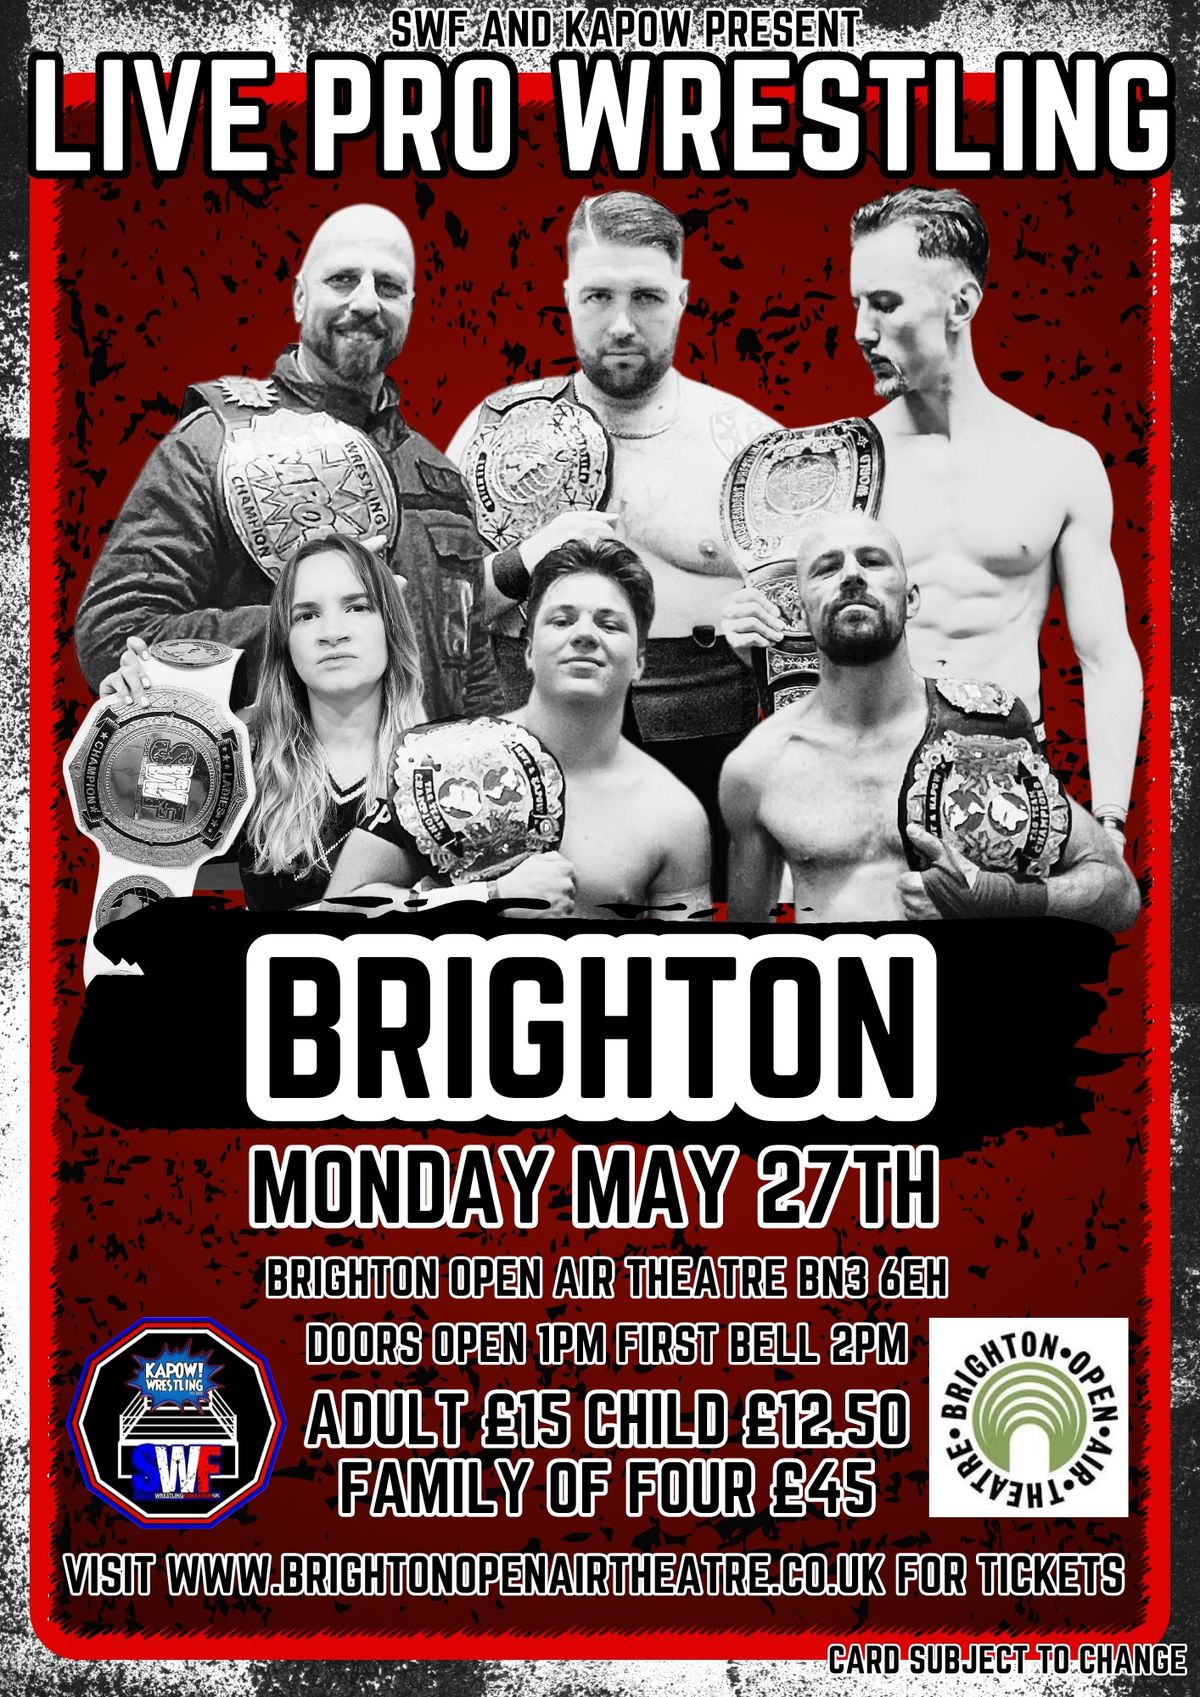 Live Wrestling back in Brighton- Tag Teams and Tear aways. 